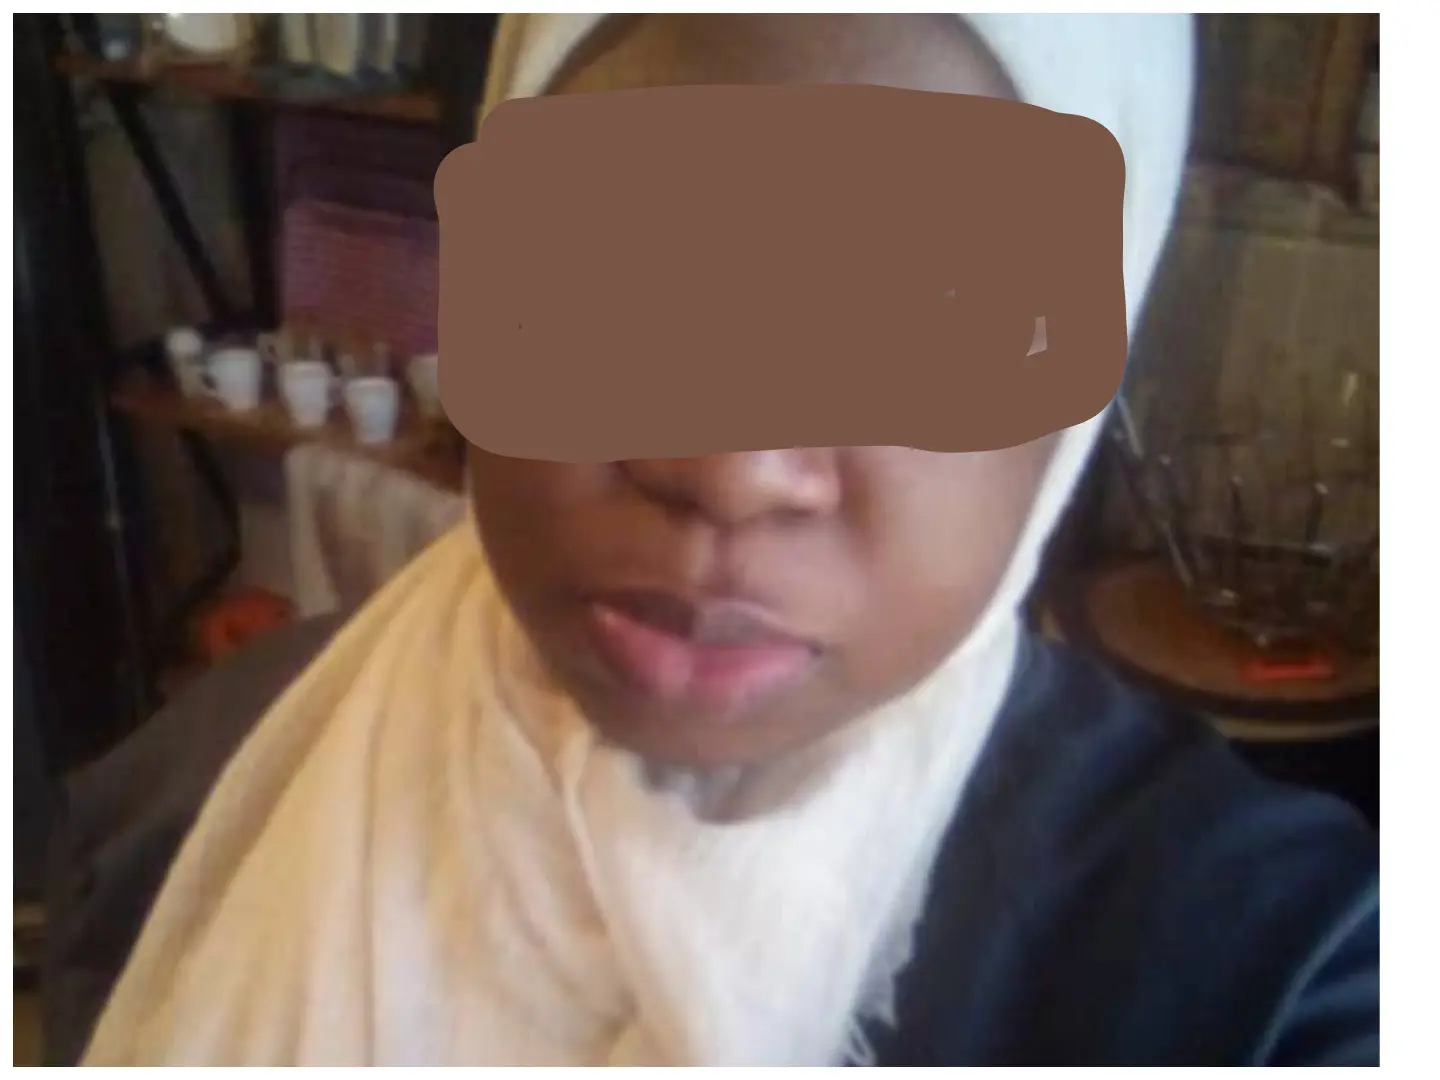 Anambra Woman Recounts How Facebook Trafficked Her for Prostitution in Libya